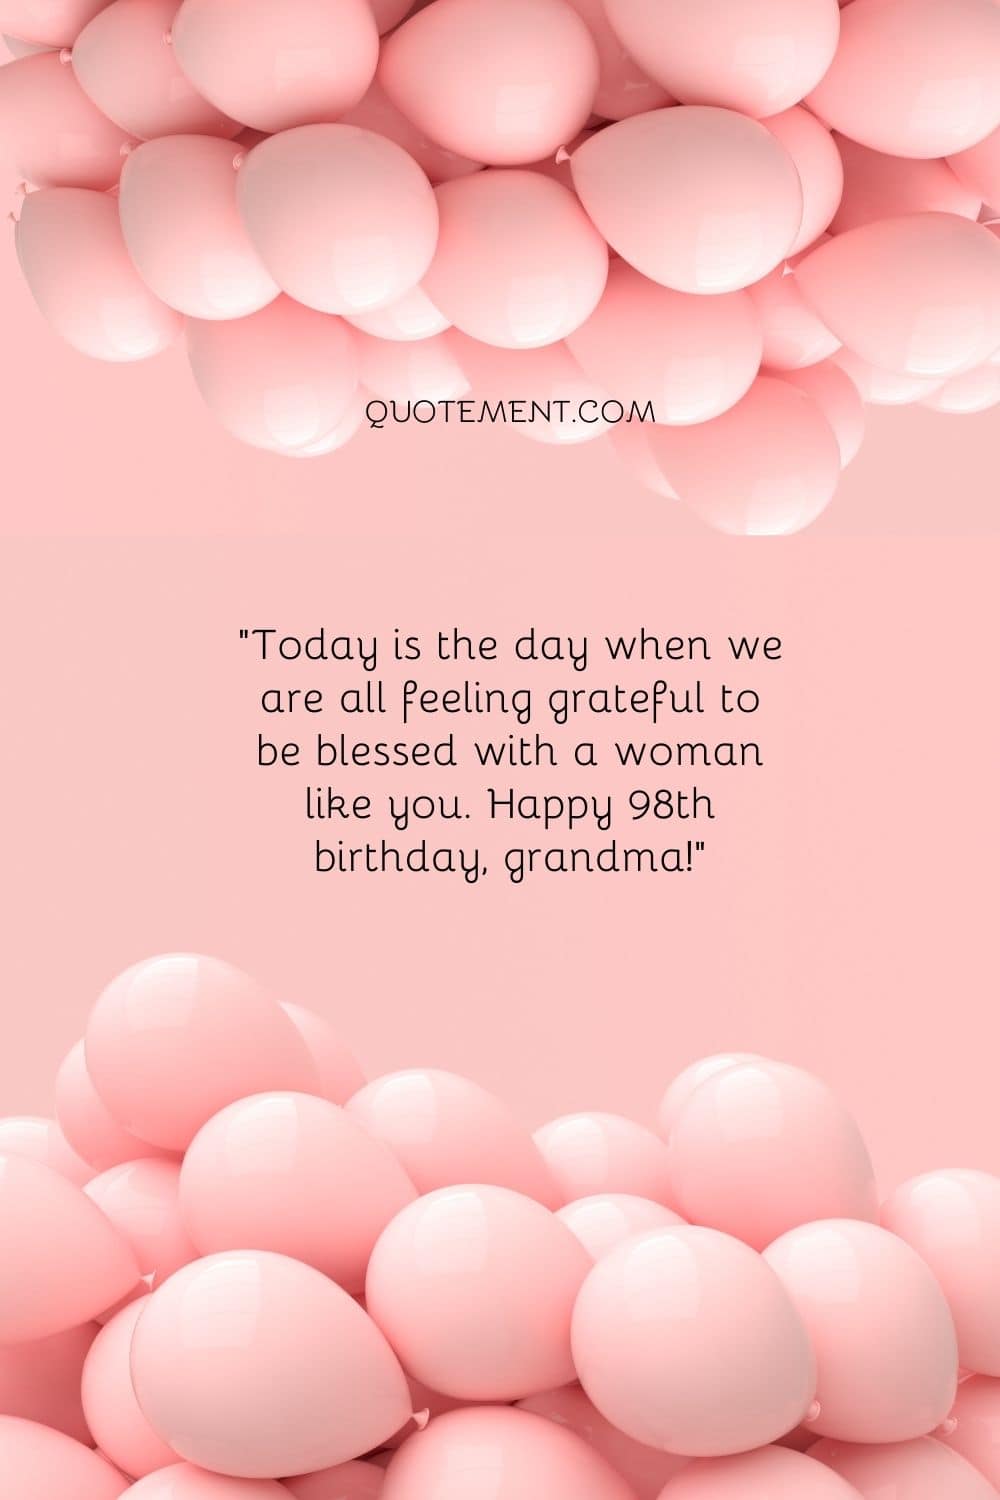 Today is the day when we are all feeling grateful to be blessed with a woman like you. Happy 98th birthday, grandma